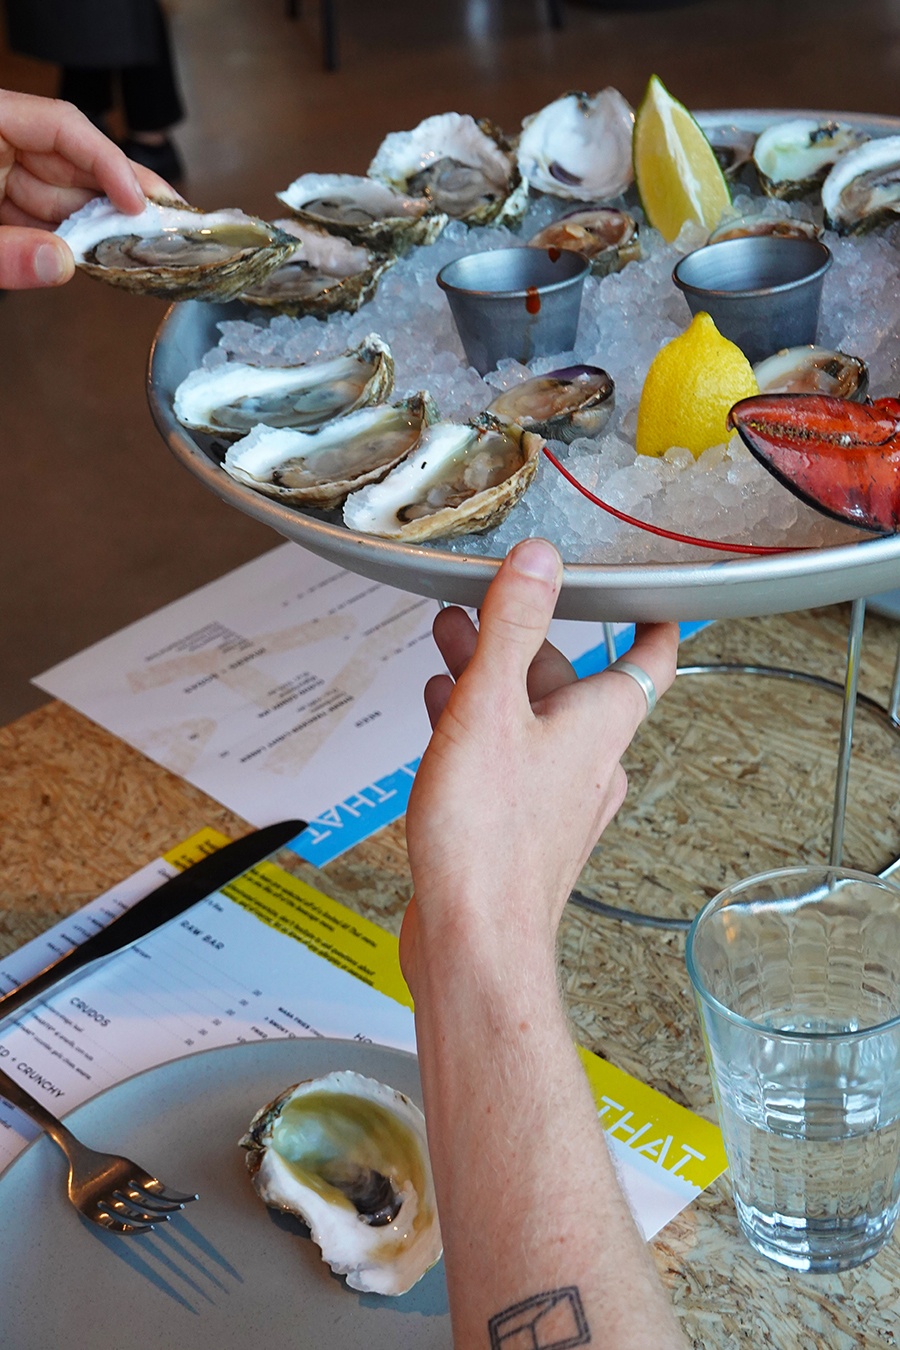 A hand grabs an oyster from a silver plate of ice and shellfish at a restaurant table.